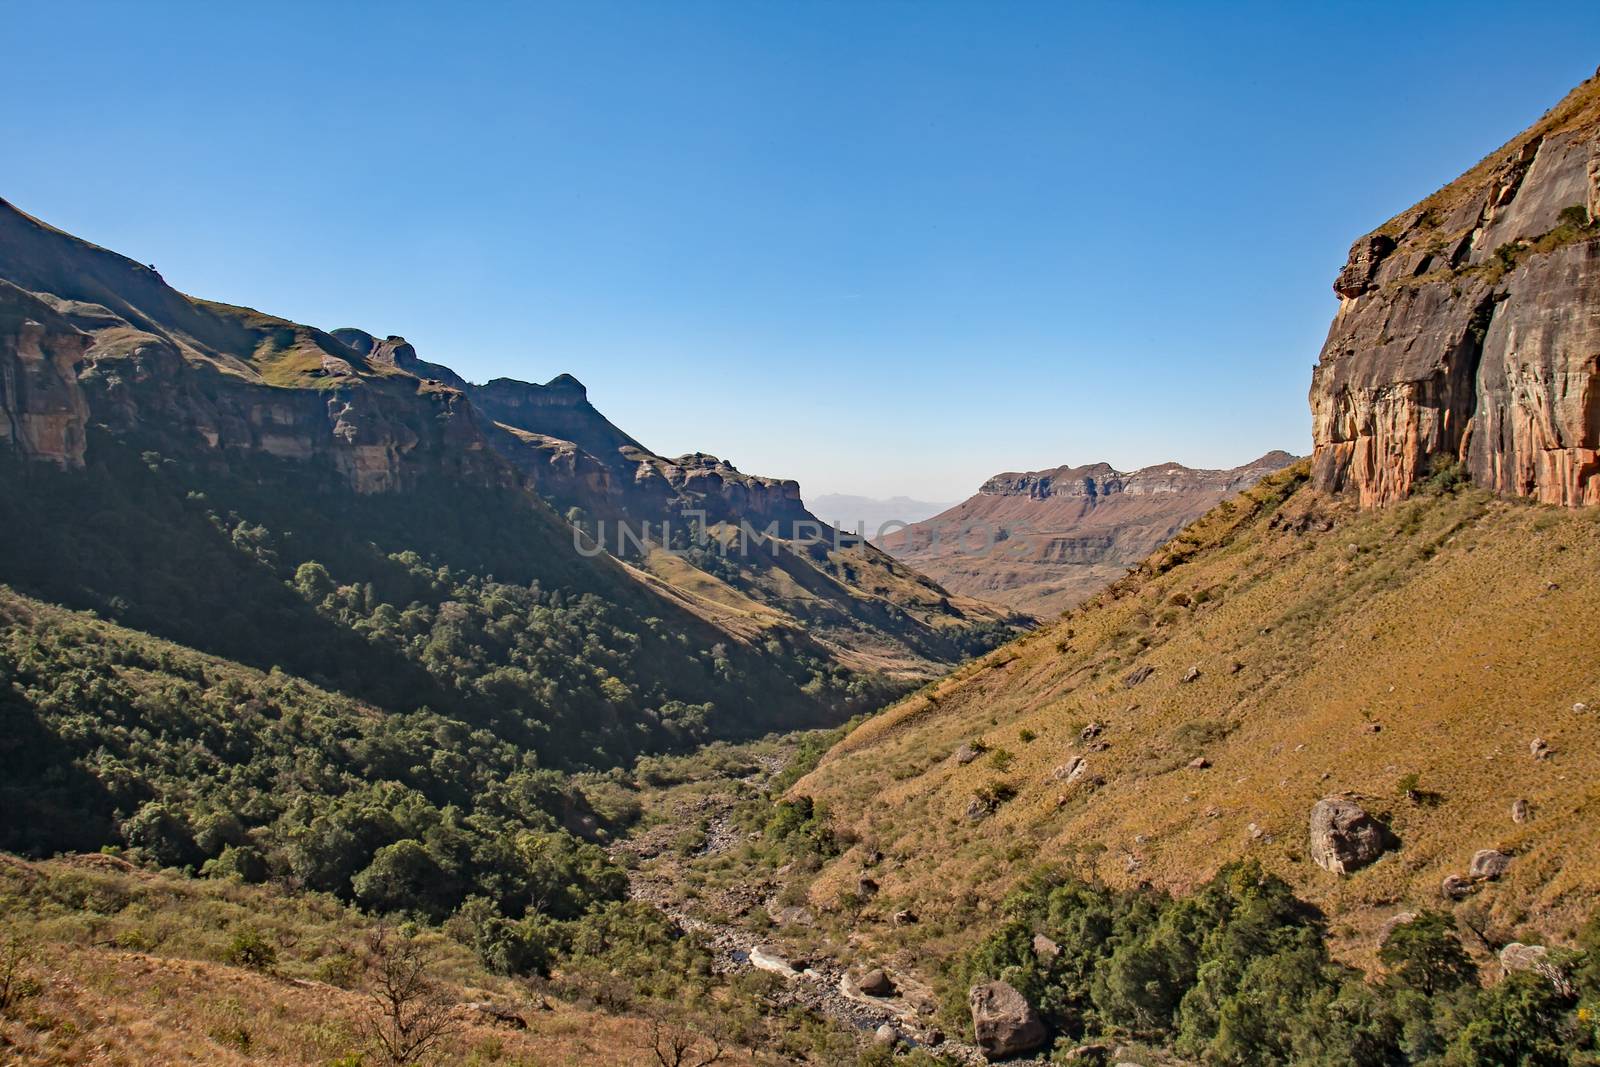 View over the Tugela River Valley in the Royal Natal National Park. Kwa-Zulu-Natal. South Africa